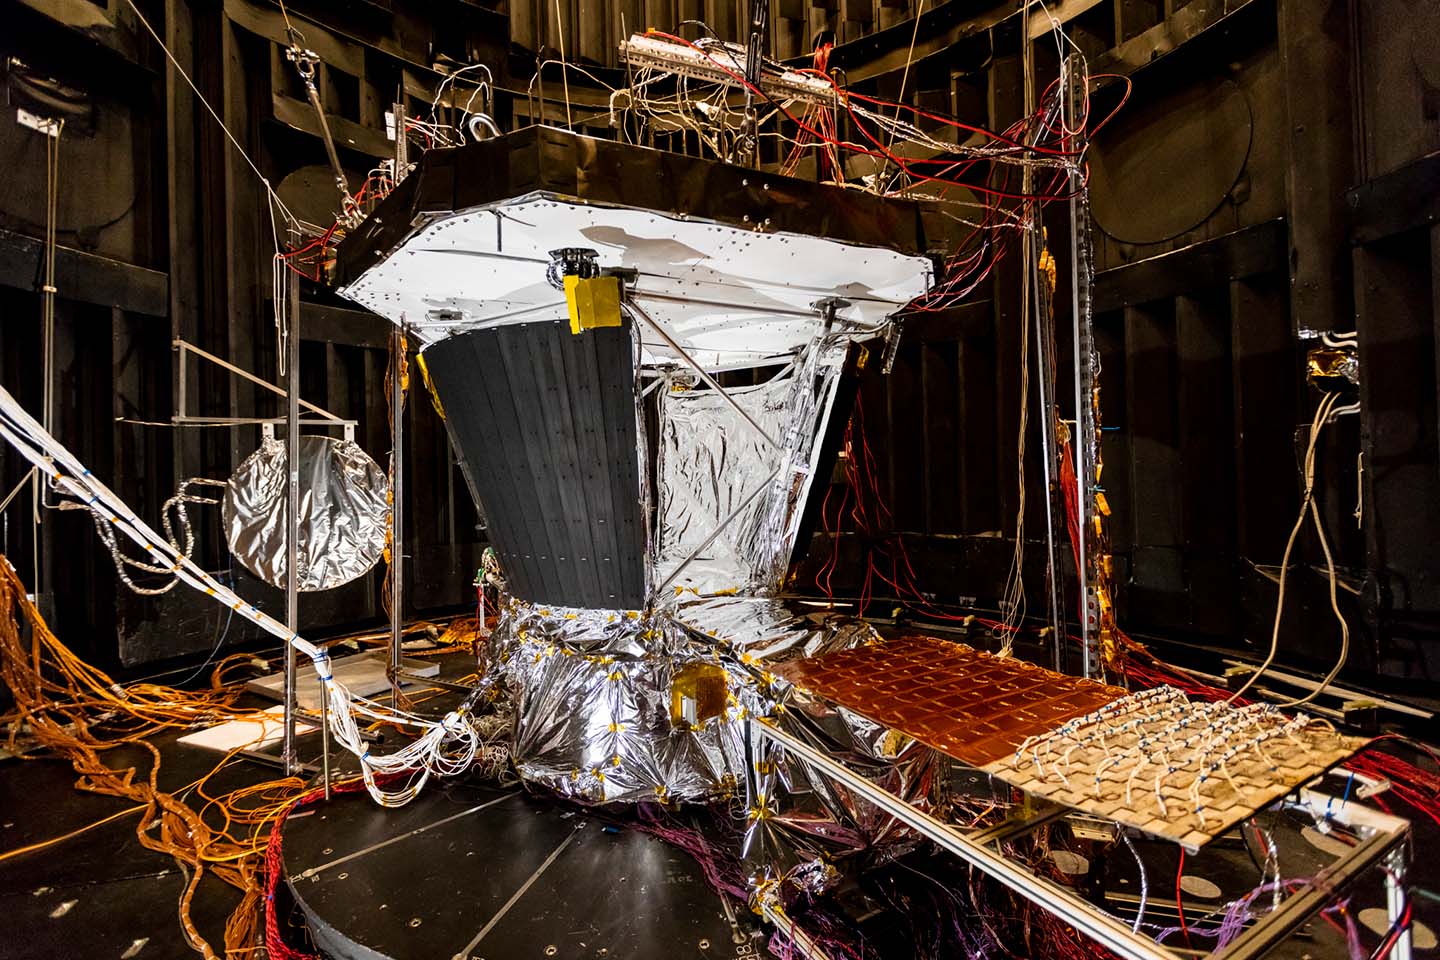 The solar array cooling system for the Parker Solar Probe spacecraft